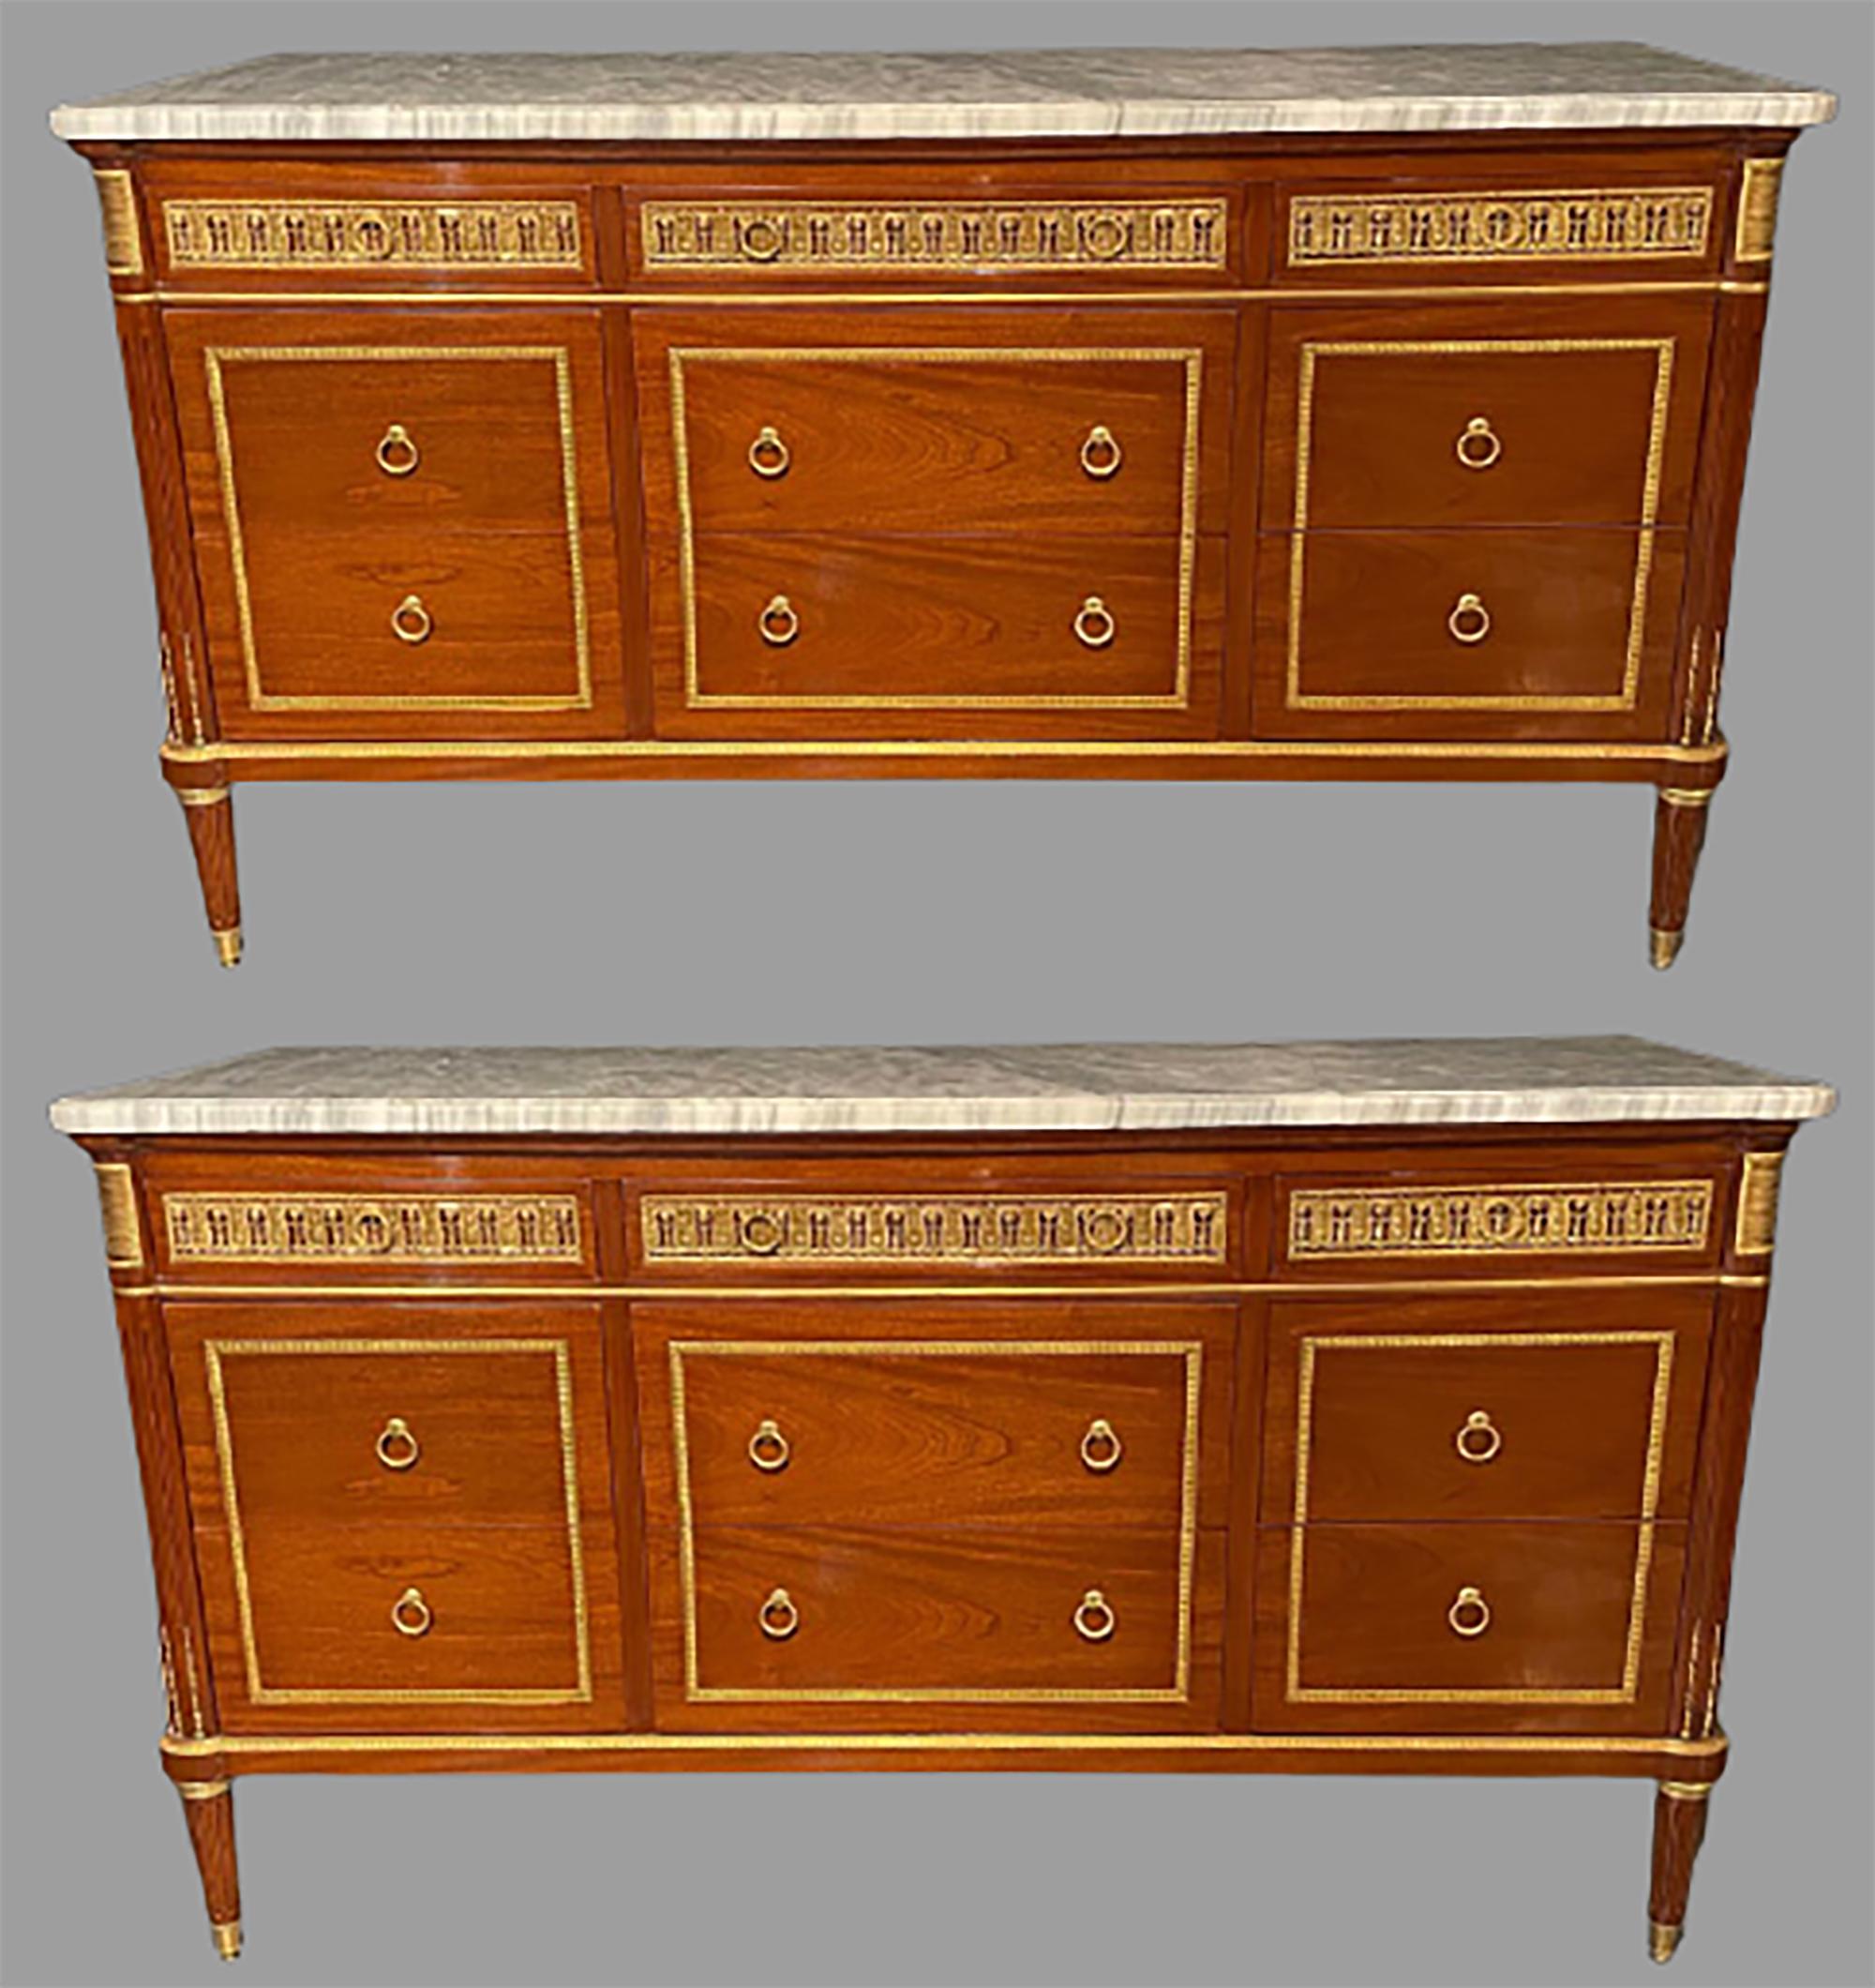 Pair of monumental Louis XVI style marble-top commodes in the Maison Jansen fashion. These impressive and finely constructed commodes or sideboards are simply stunning and leave nothing to the imagination. Palatial, 39 inches high and 69.25 inches